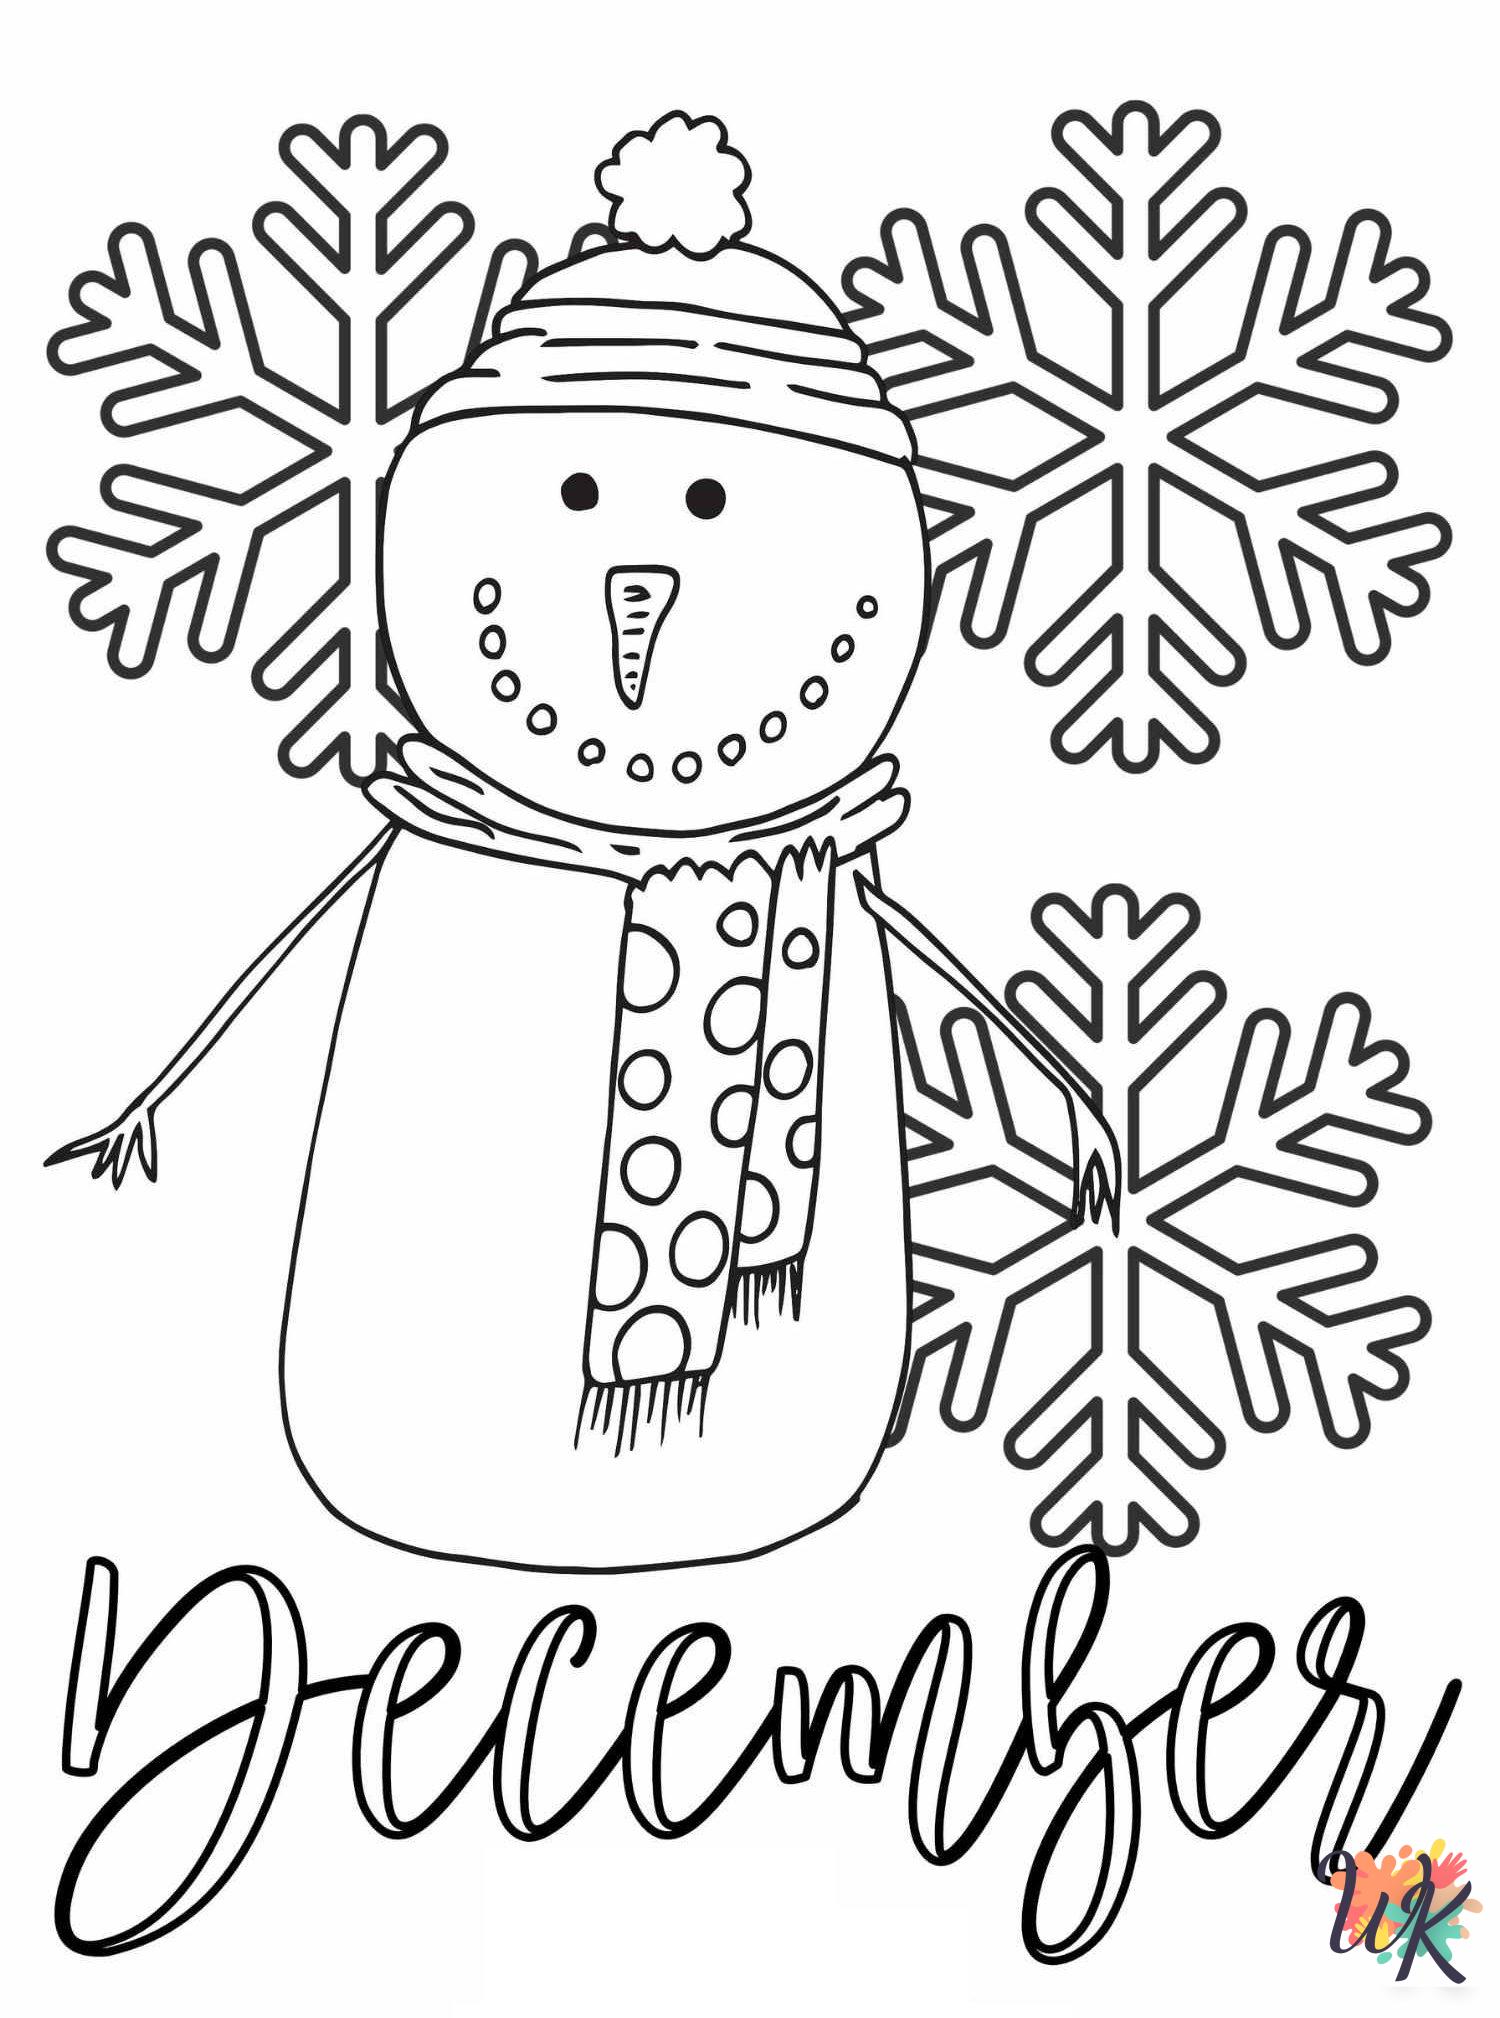 December coloring pages